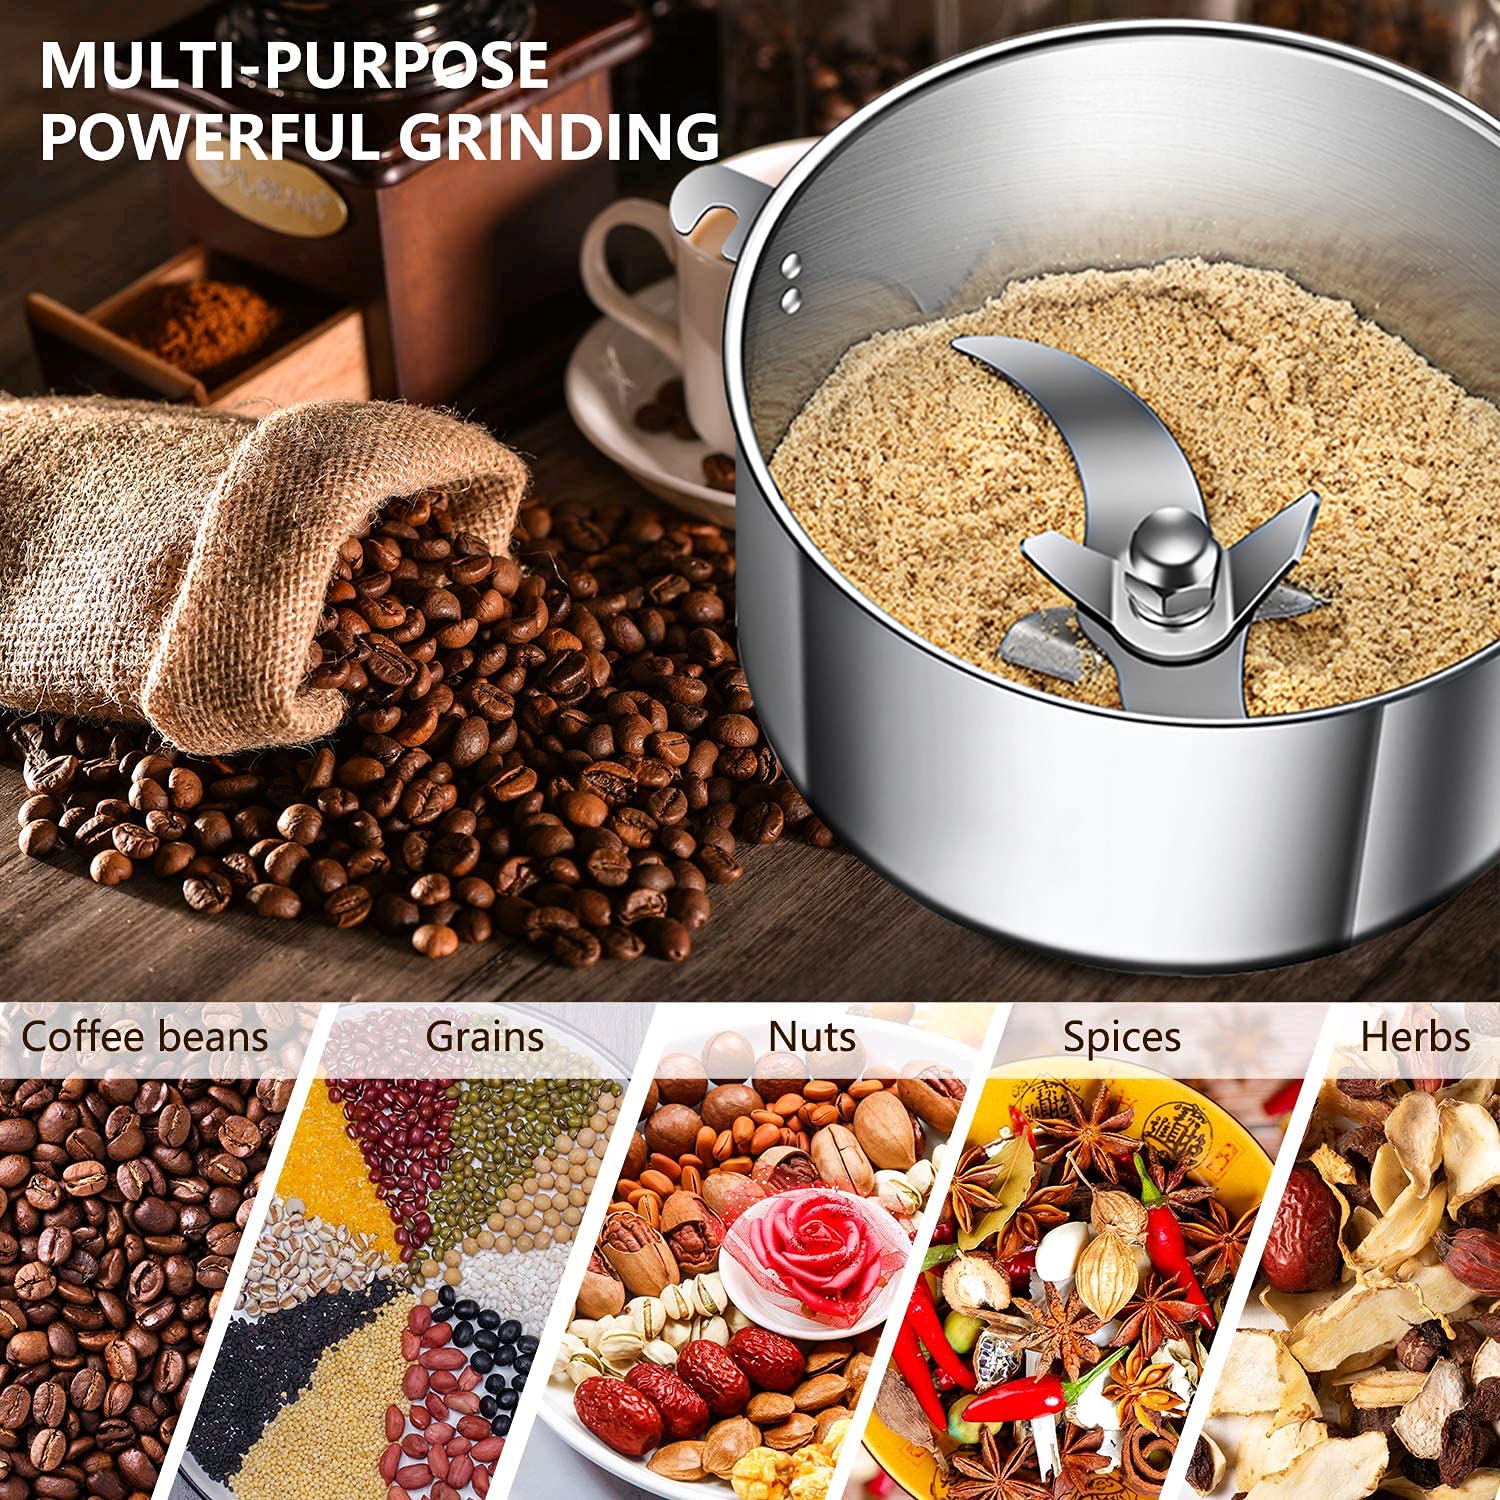 Grain Mill Grinder 750g High Speed Electric Stainless Steel Grinder Cereals Corn Flour Pulverizer Powder Machine for Dry Spice Herbs Grains Coffee Rice Pepper(750g Stand Type)